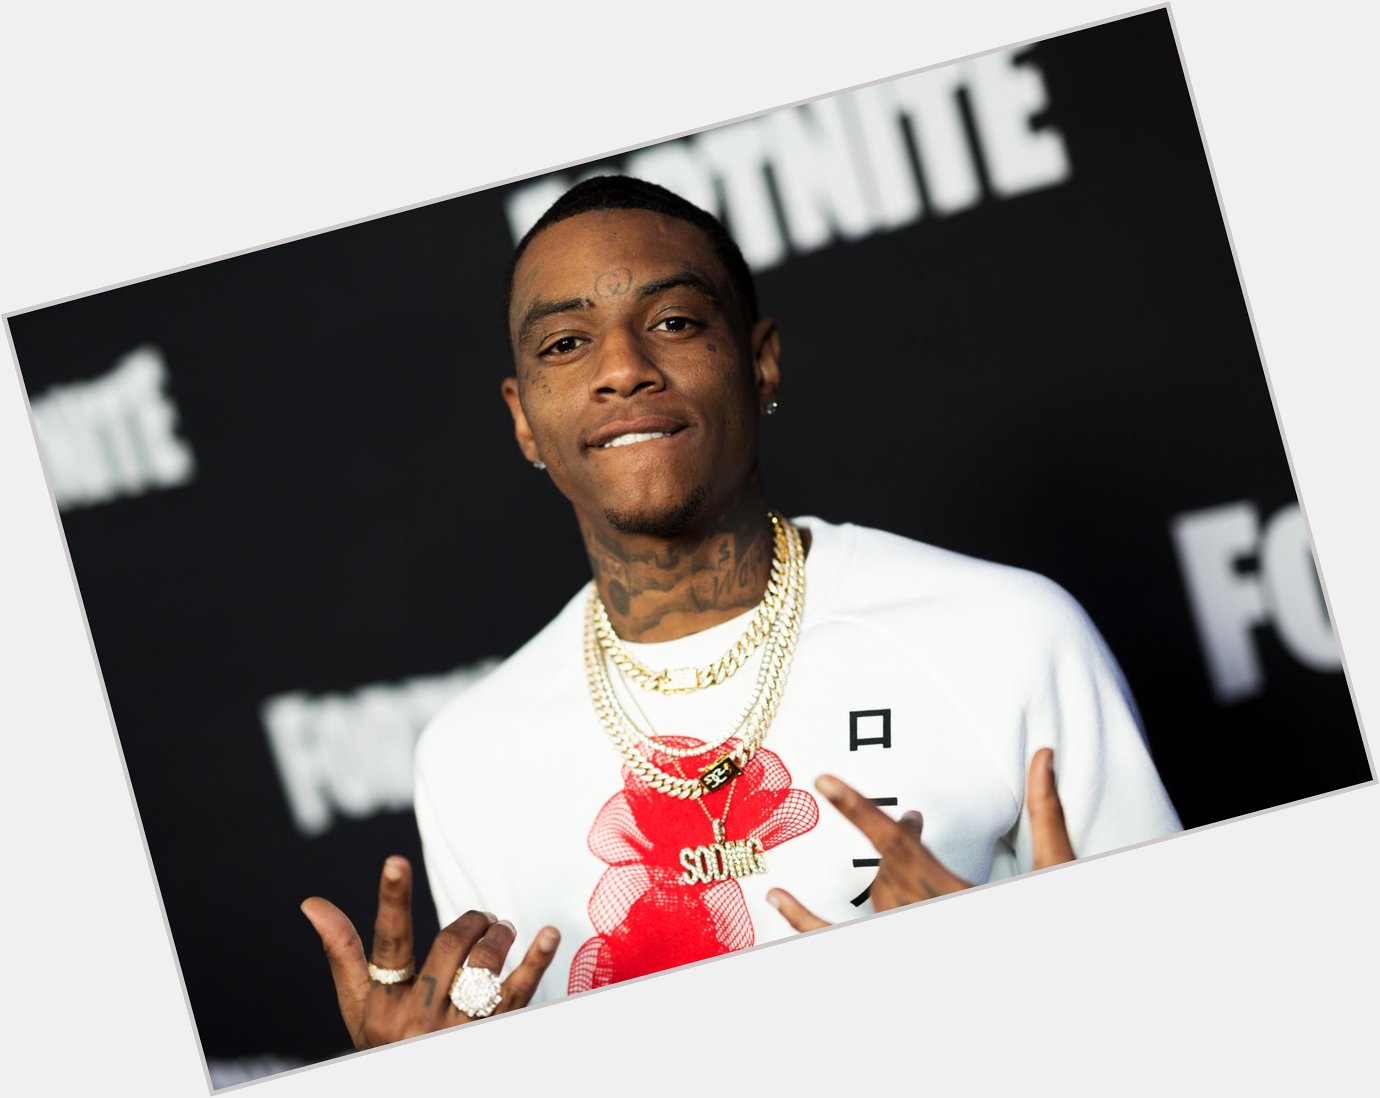 Happy Birthday to Soulja Boy, who turns 31 years old today! 